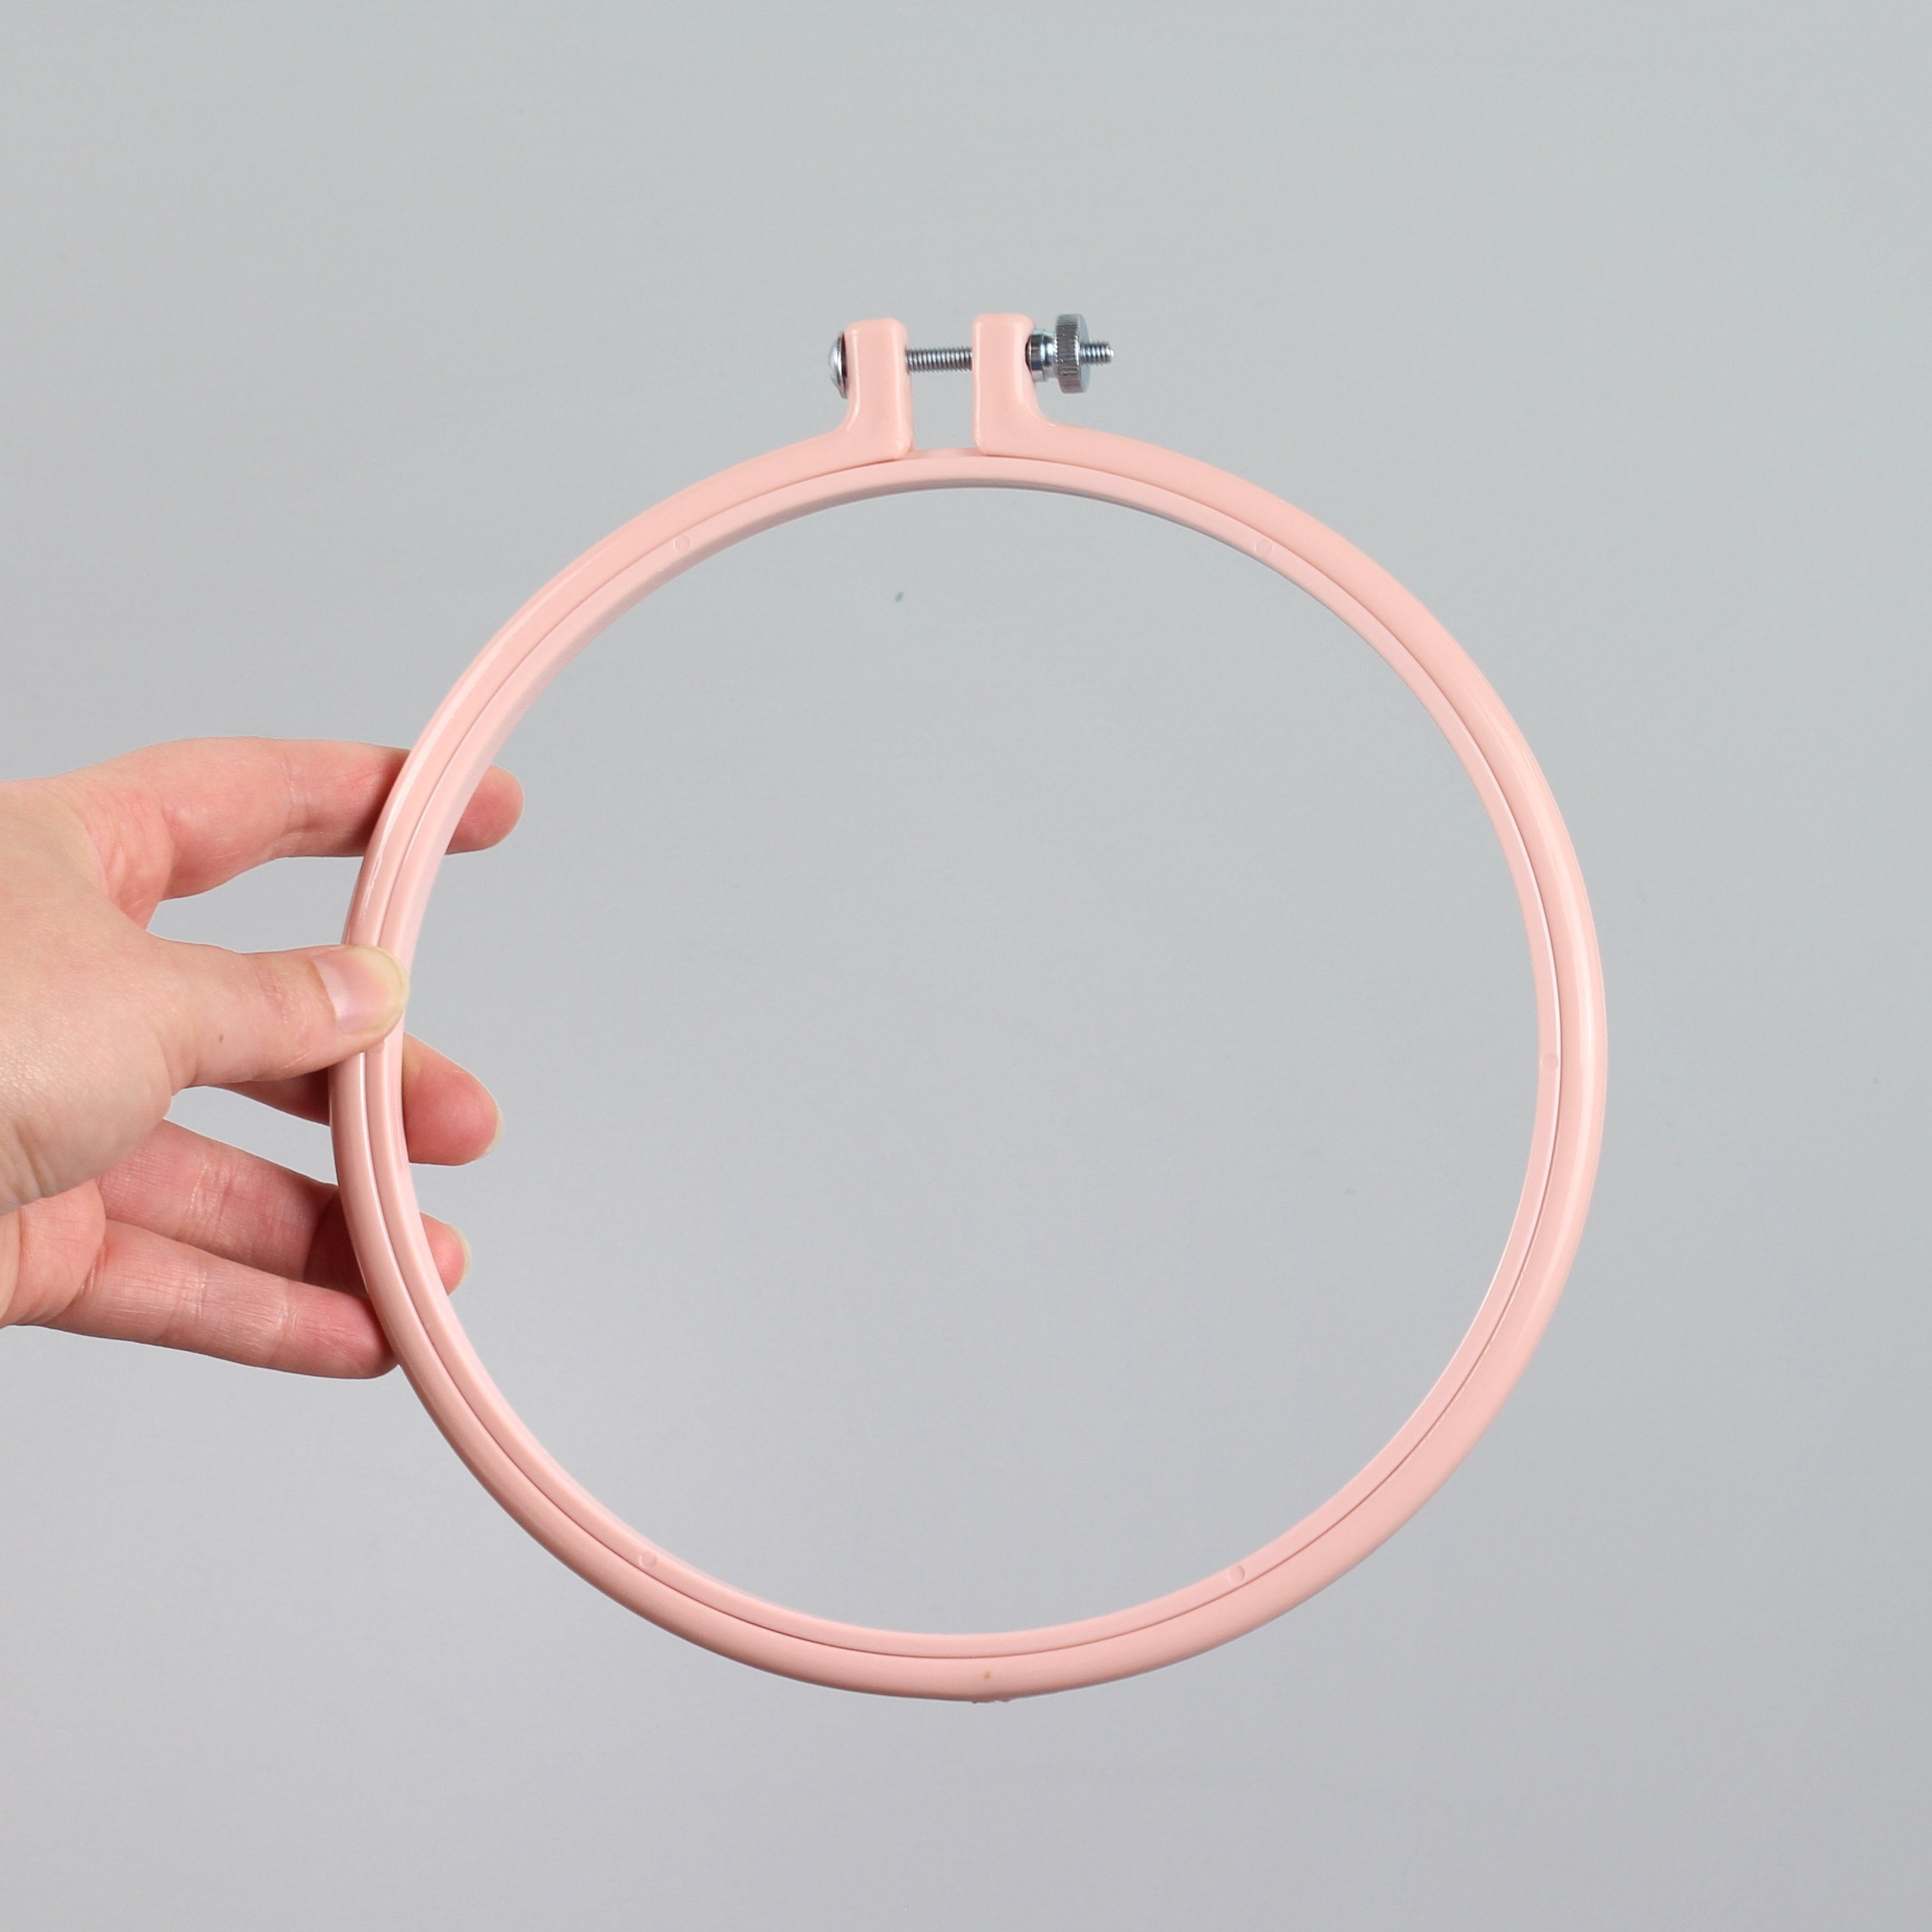 Coloured Plastic Embroidery Hoop 7" - Powder